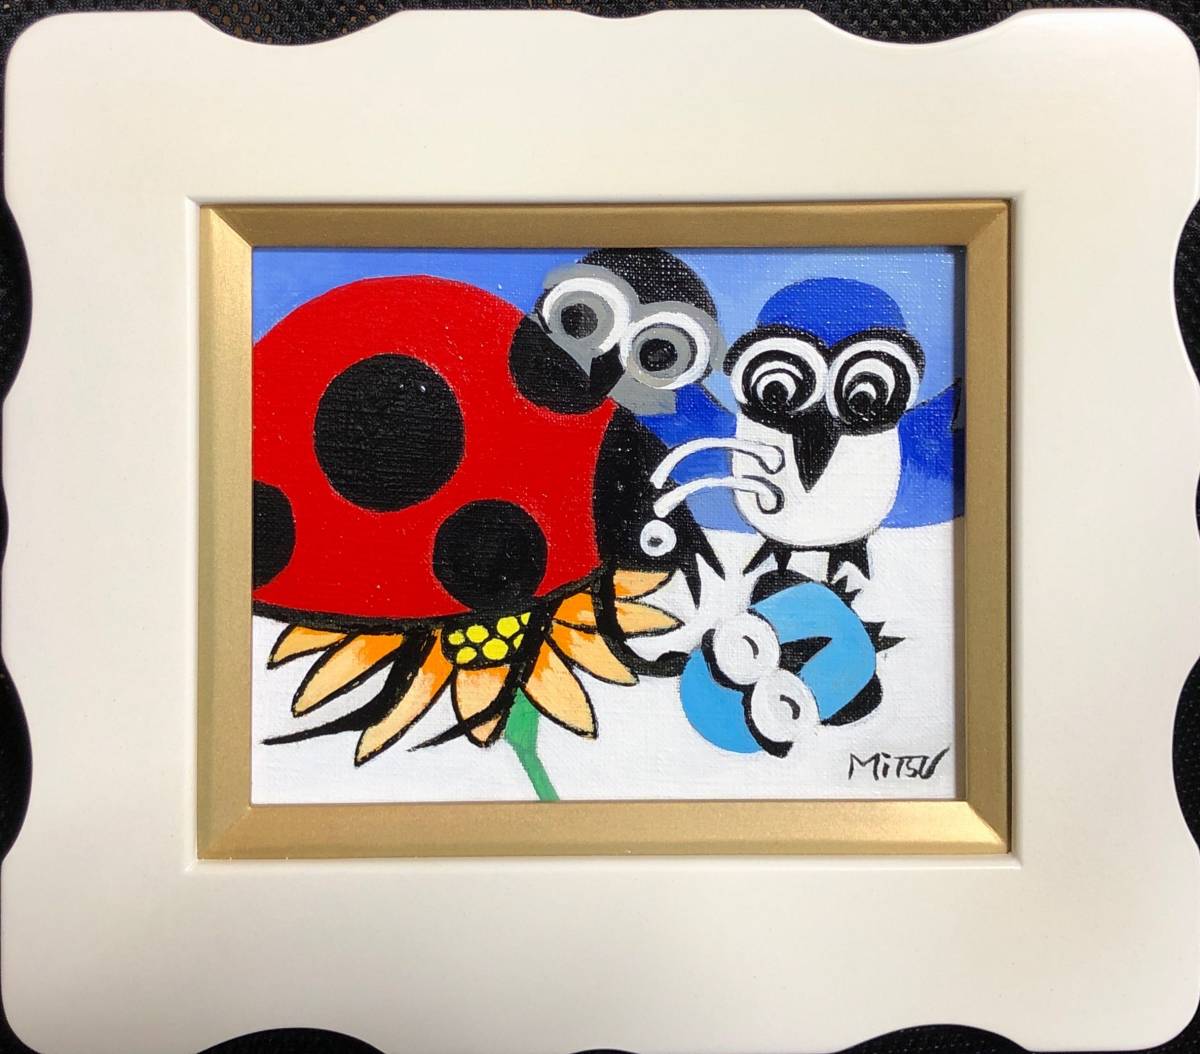  oil painting / oil painting [ observation - ladybug ]Mitsuyo F0 number frame * free shipping *[ genuine work ]